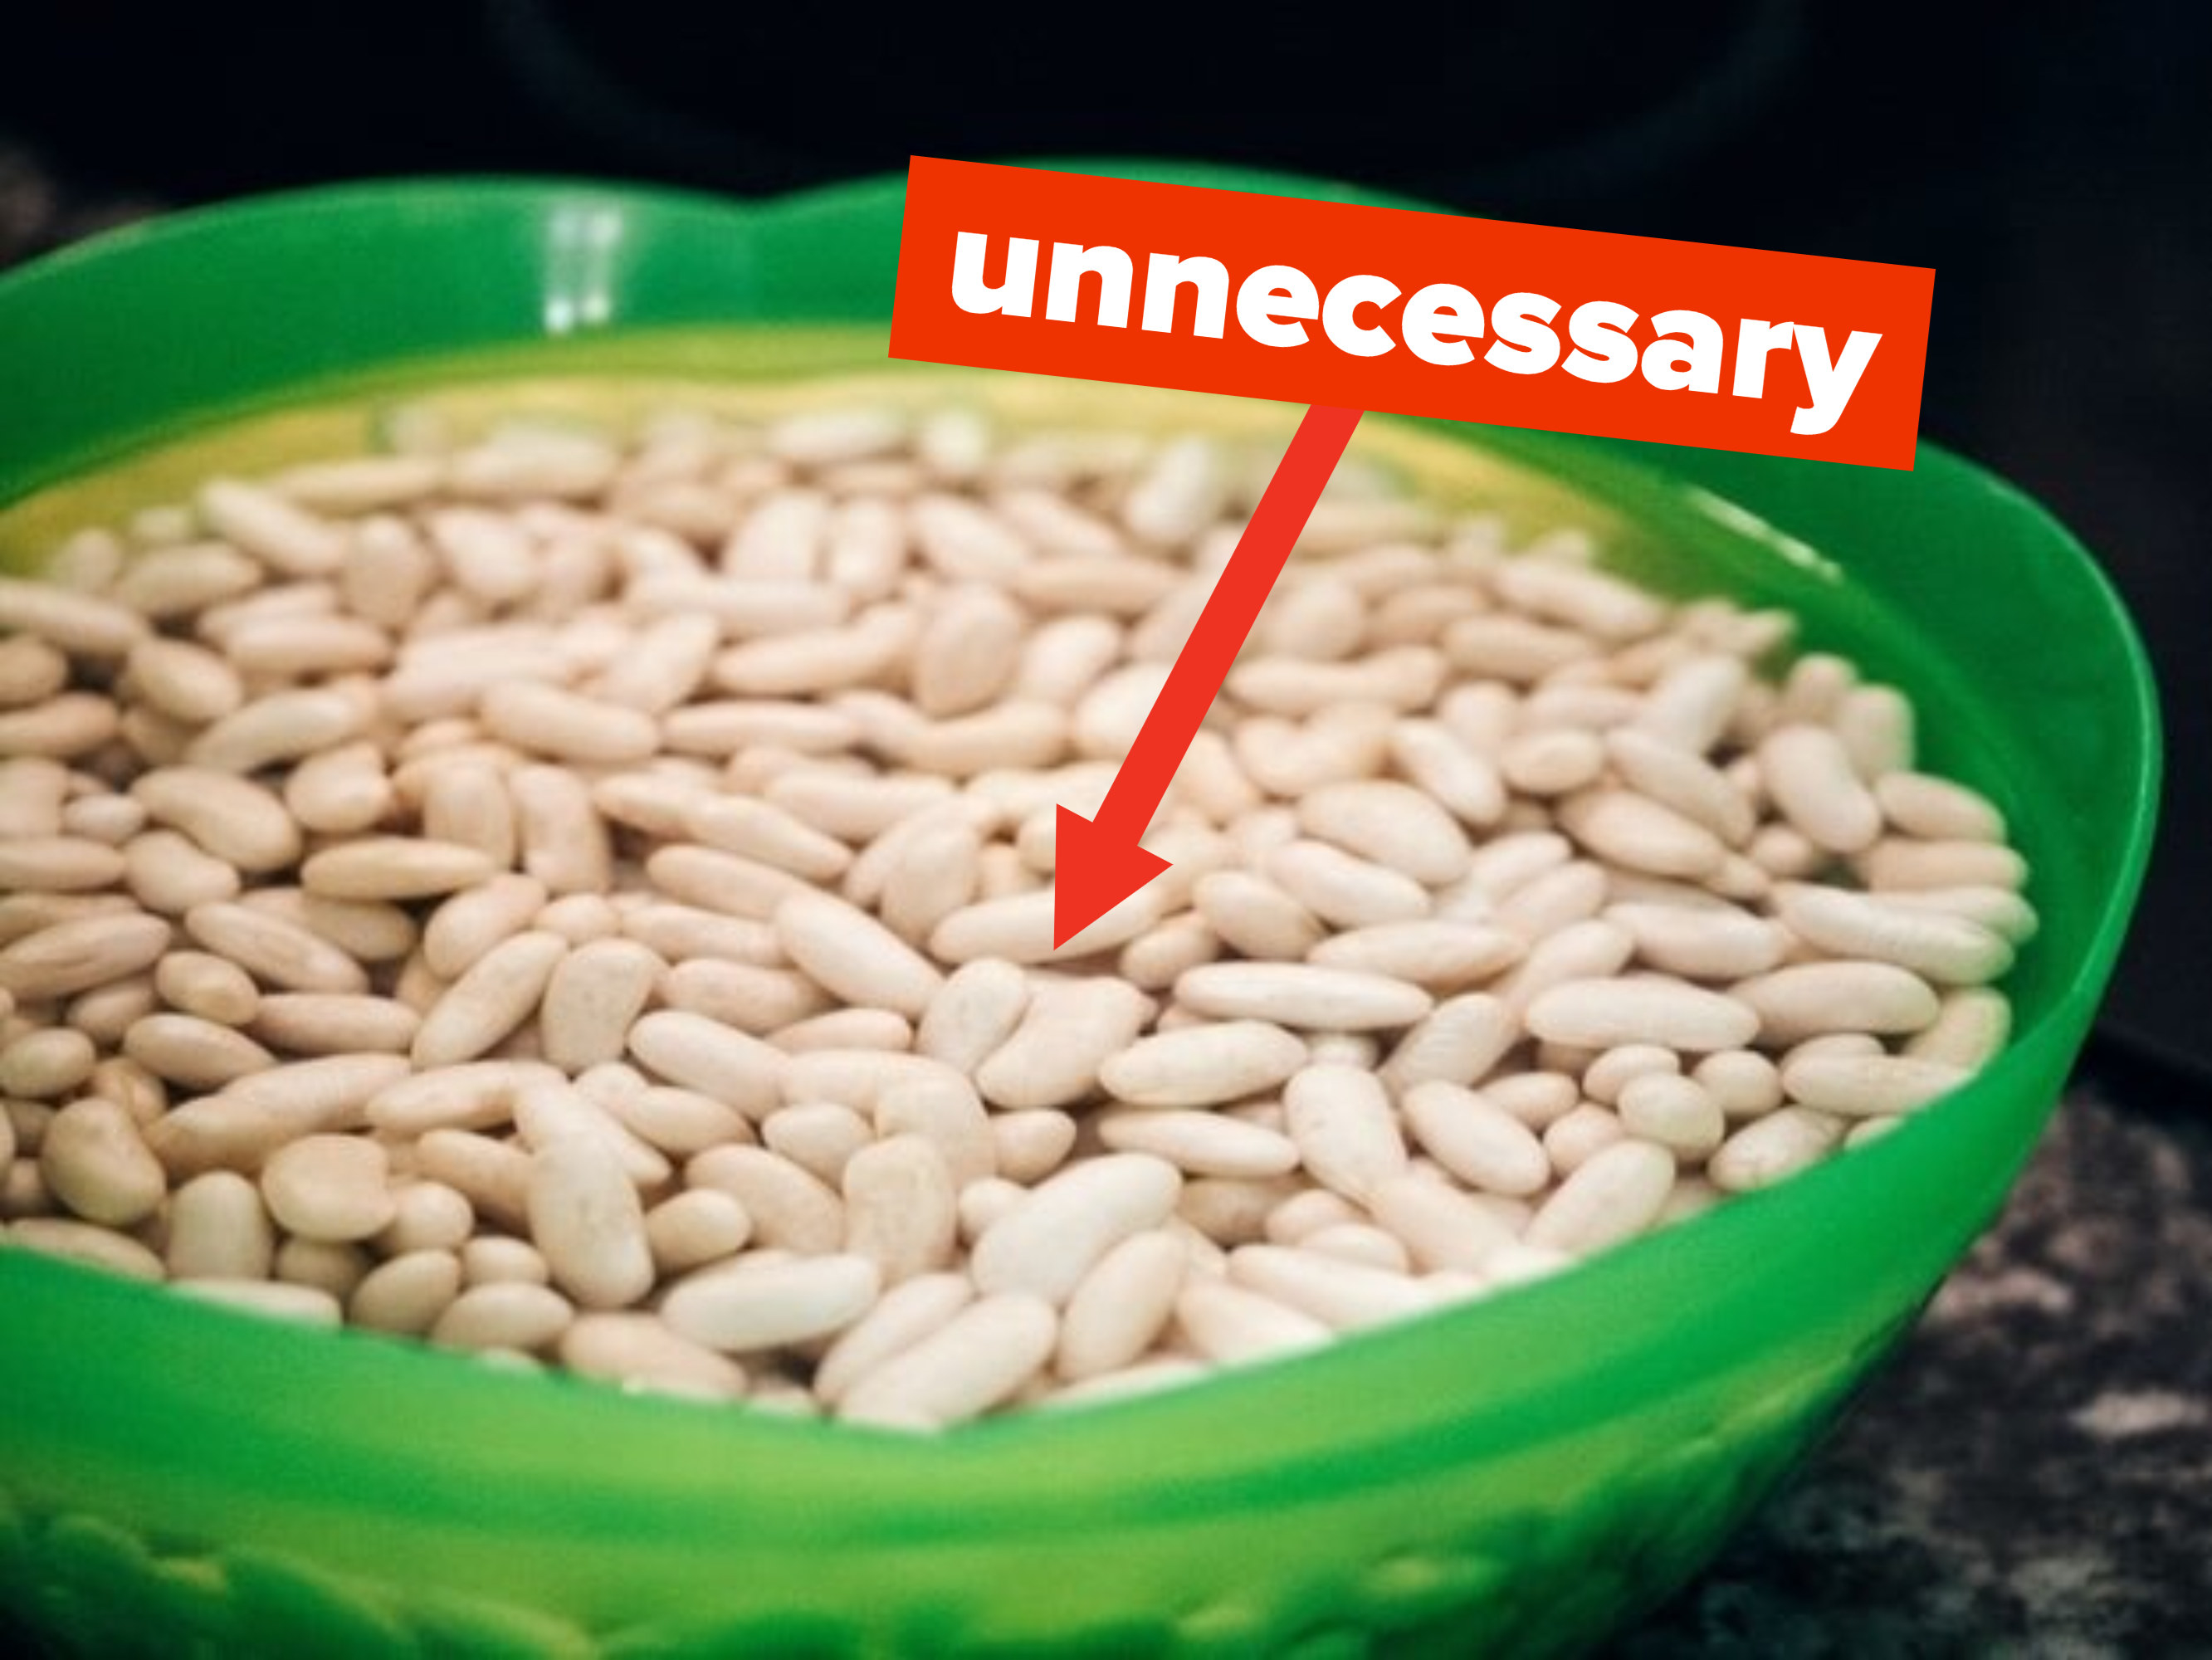 beans soaking in a green bowl with text &quot;unnecessary&quot;